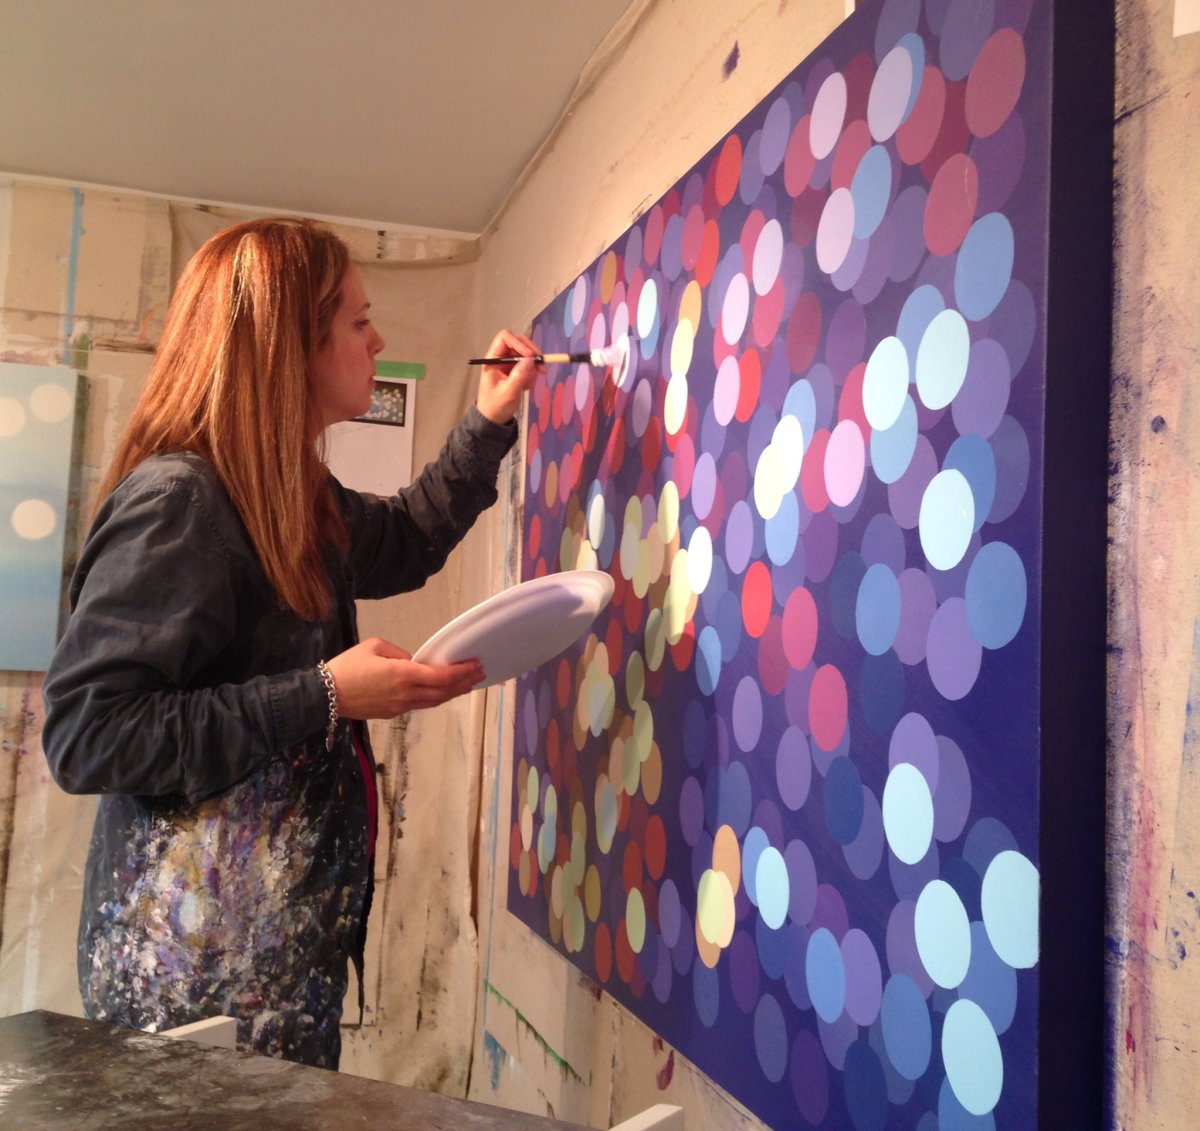 Founder of Buy Art Not Kids Rachelle Kearns works on an upcoming piece to raise funds for children in need.